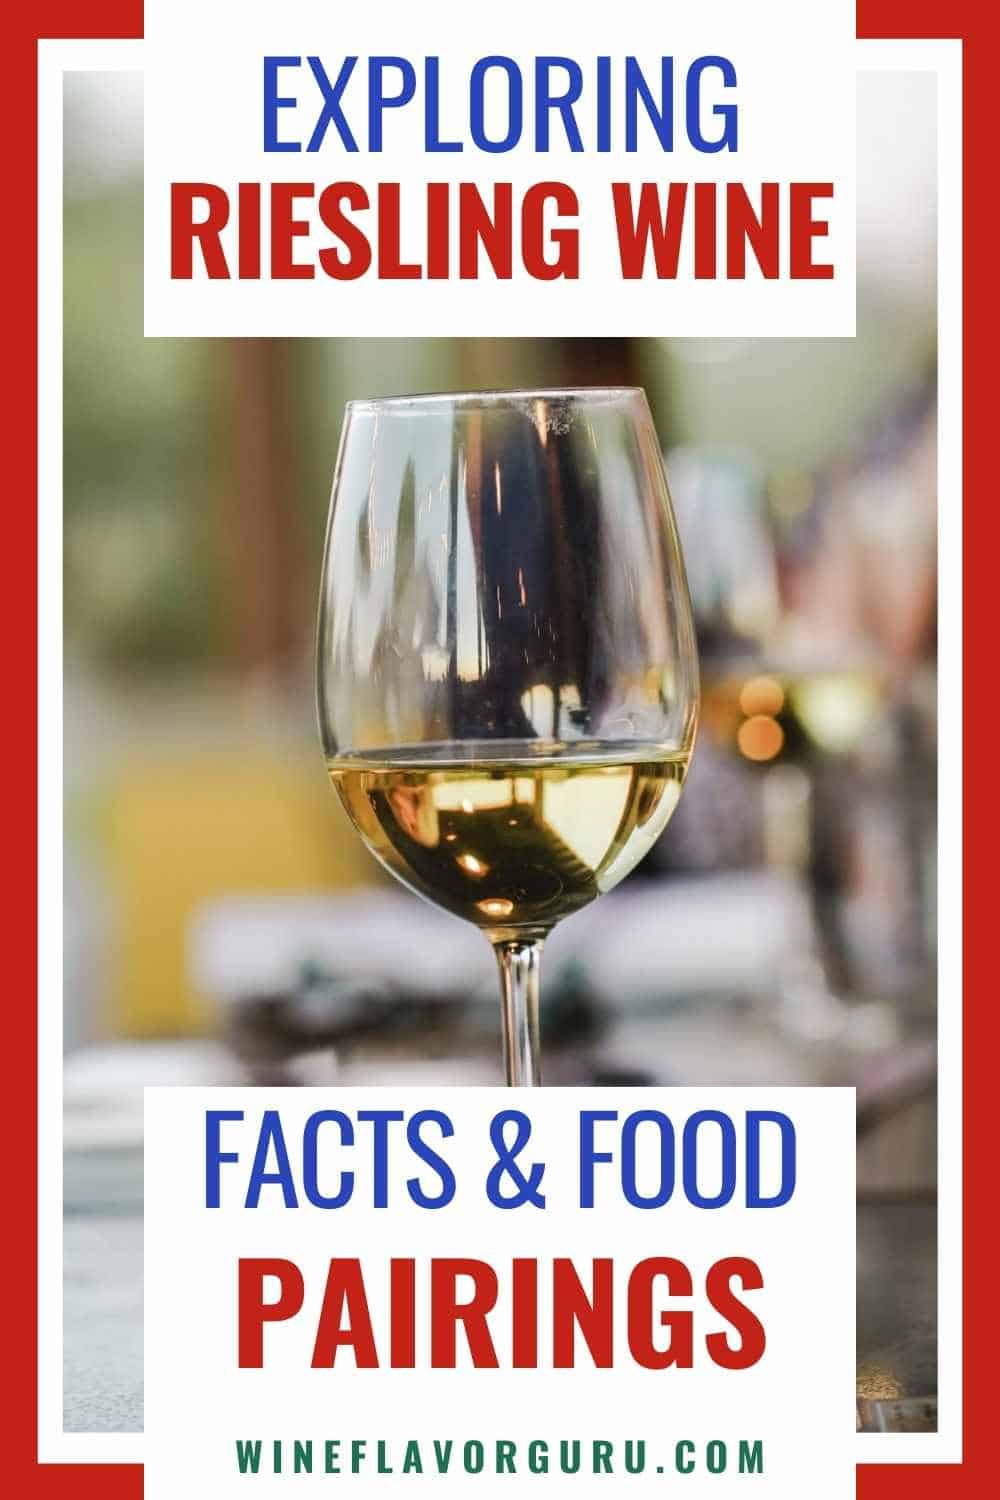 What Is Riesling Wine